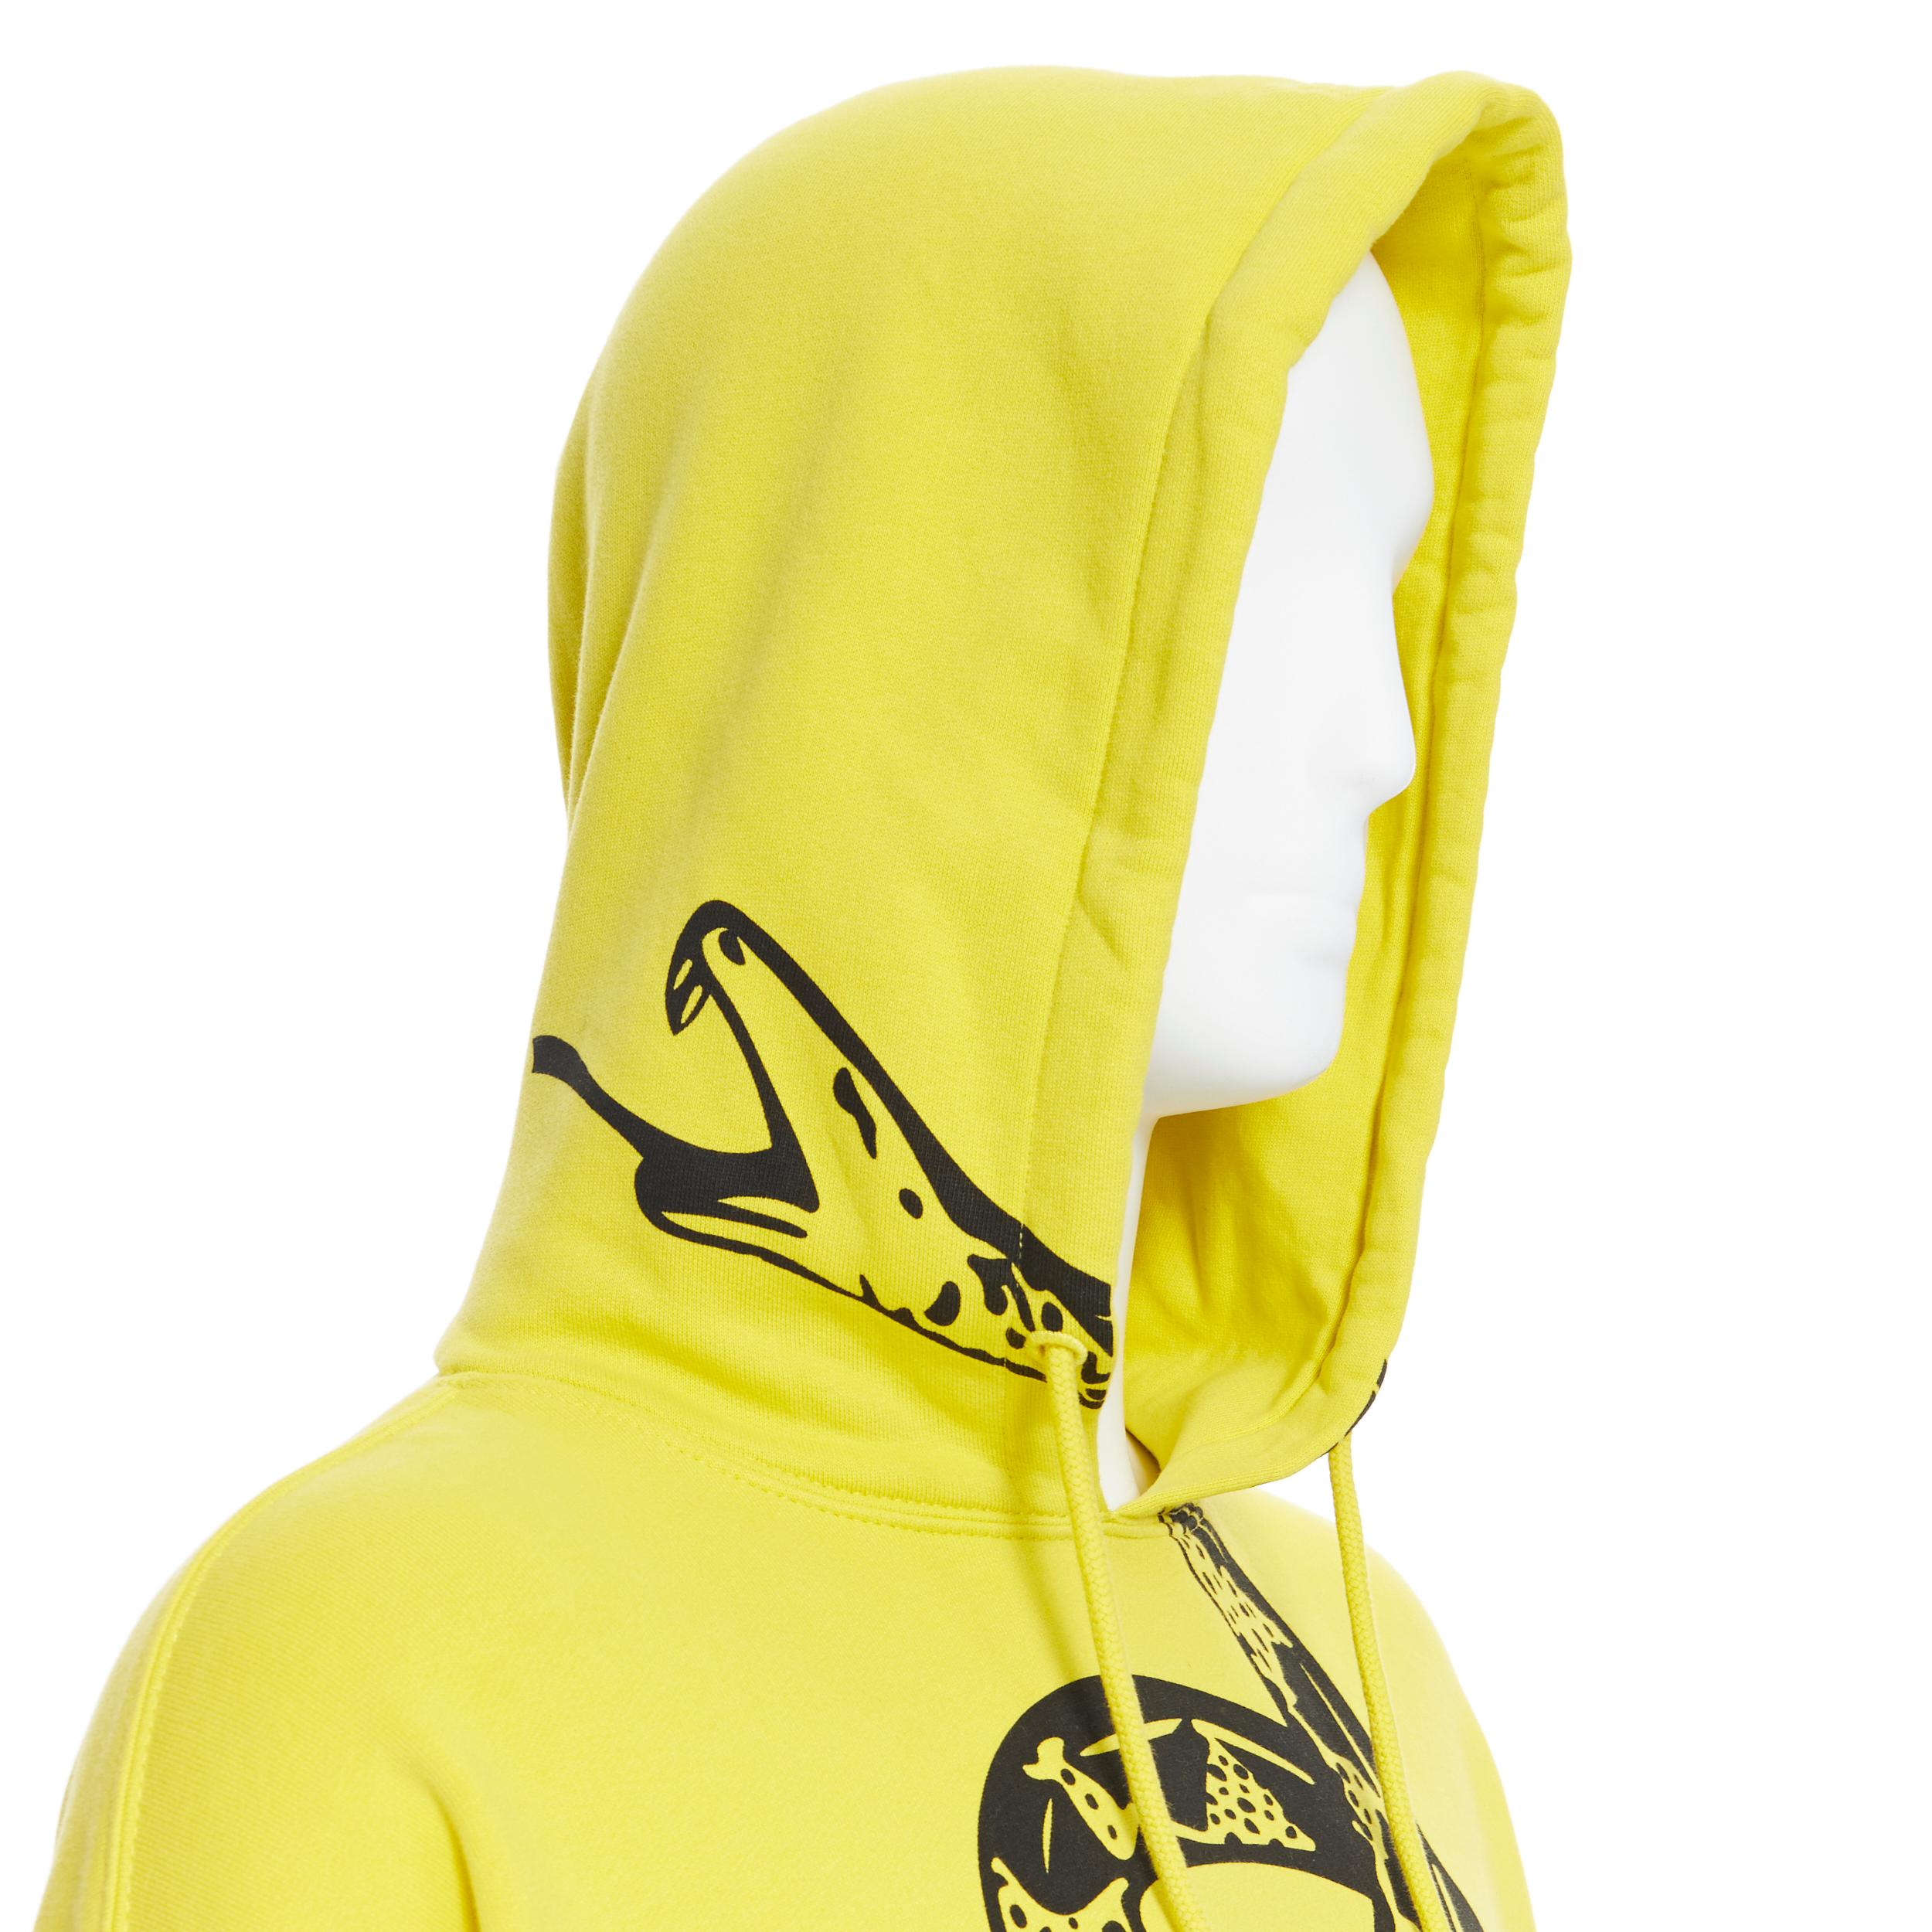 new VETEMENTS 2019 Don’t Tread On Me Snake print fleece oversized hoodie S
Brand: Vetements
Designer: Demna Gvasalia
Collection: AW2019
Model Name / Style: Snake hoodie
Material: Cotton
Color: Yellow
Pattern: Abstract; Snake print
Extra Detail: